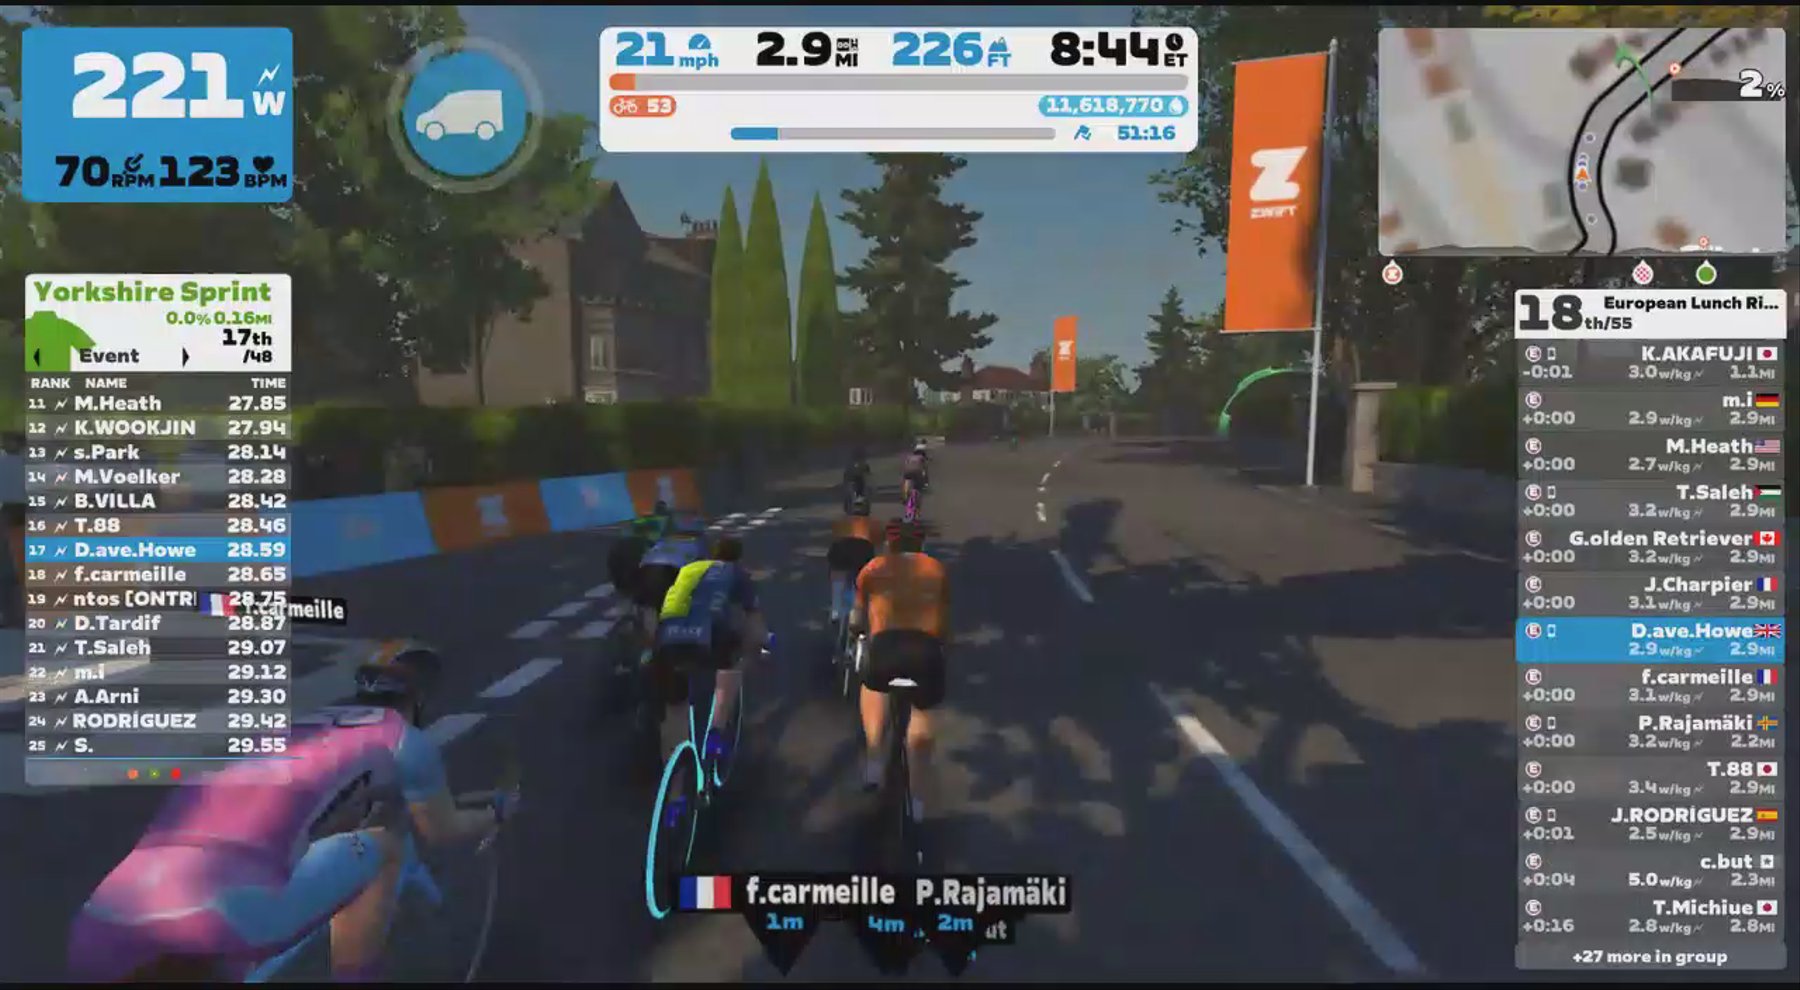 Zwift - Group Ride: European Lunch Ride (E) on Duchy Estate in Yorkshire